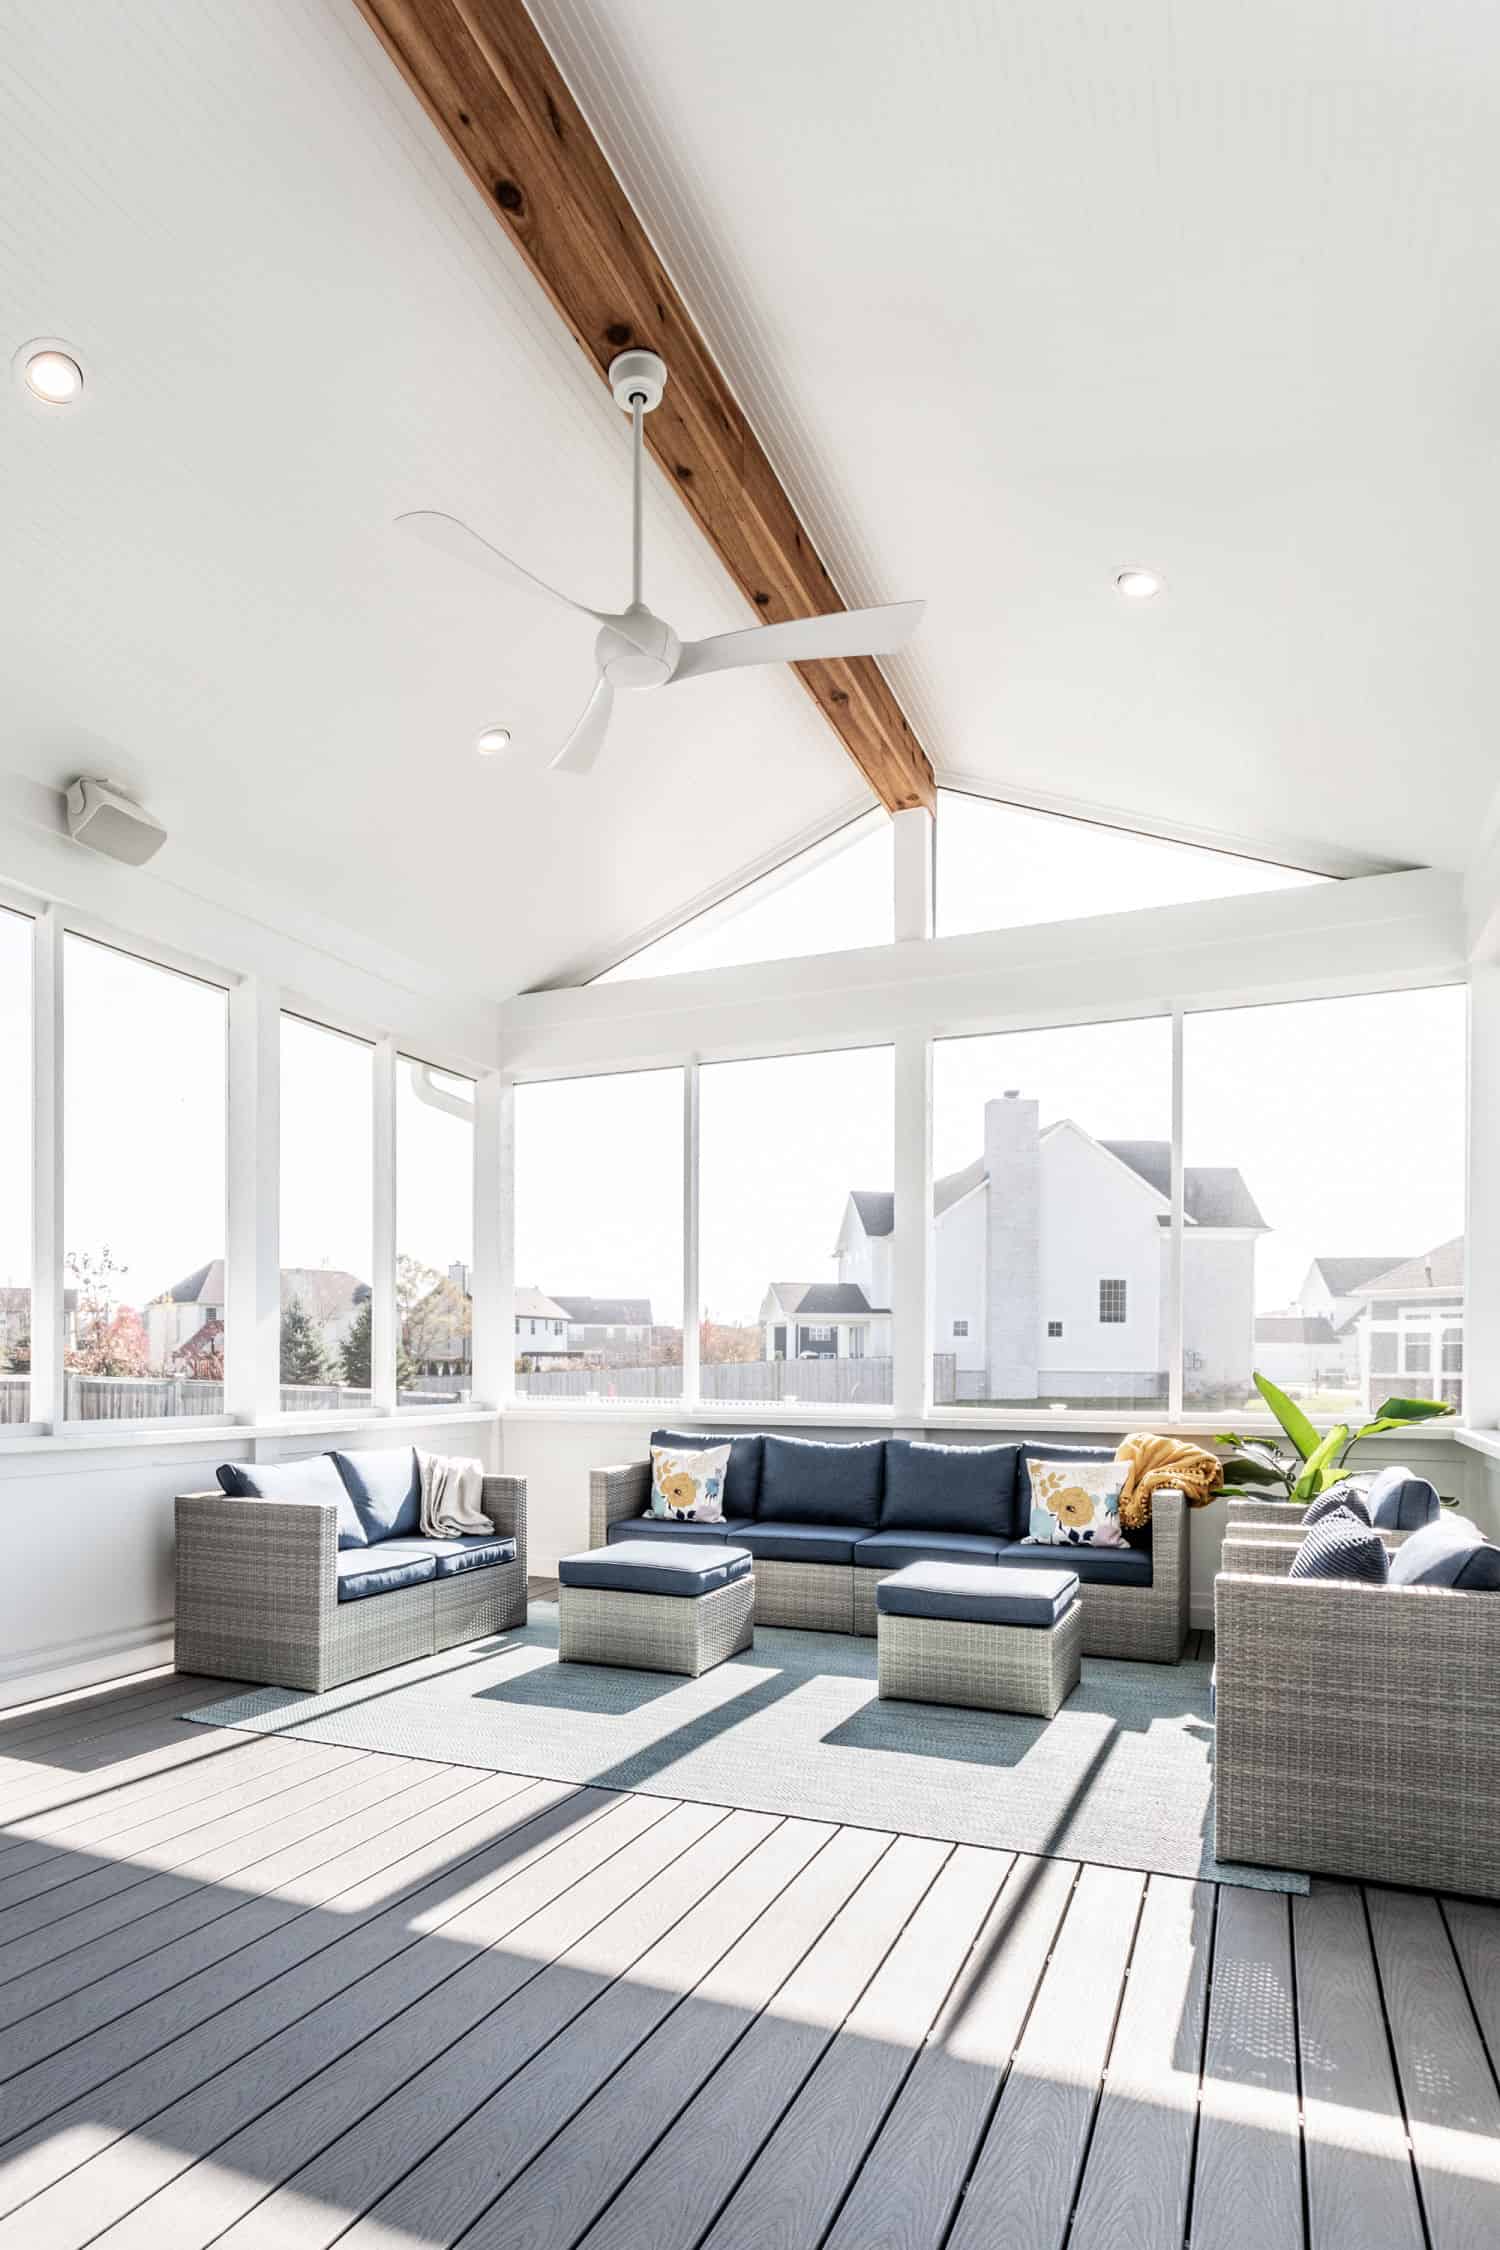 Nicholas Design Build | A remodeled screened-in porch with couches and a ceiling fan.